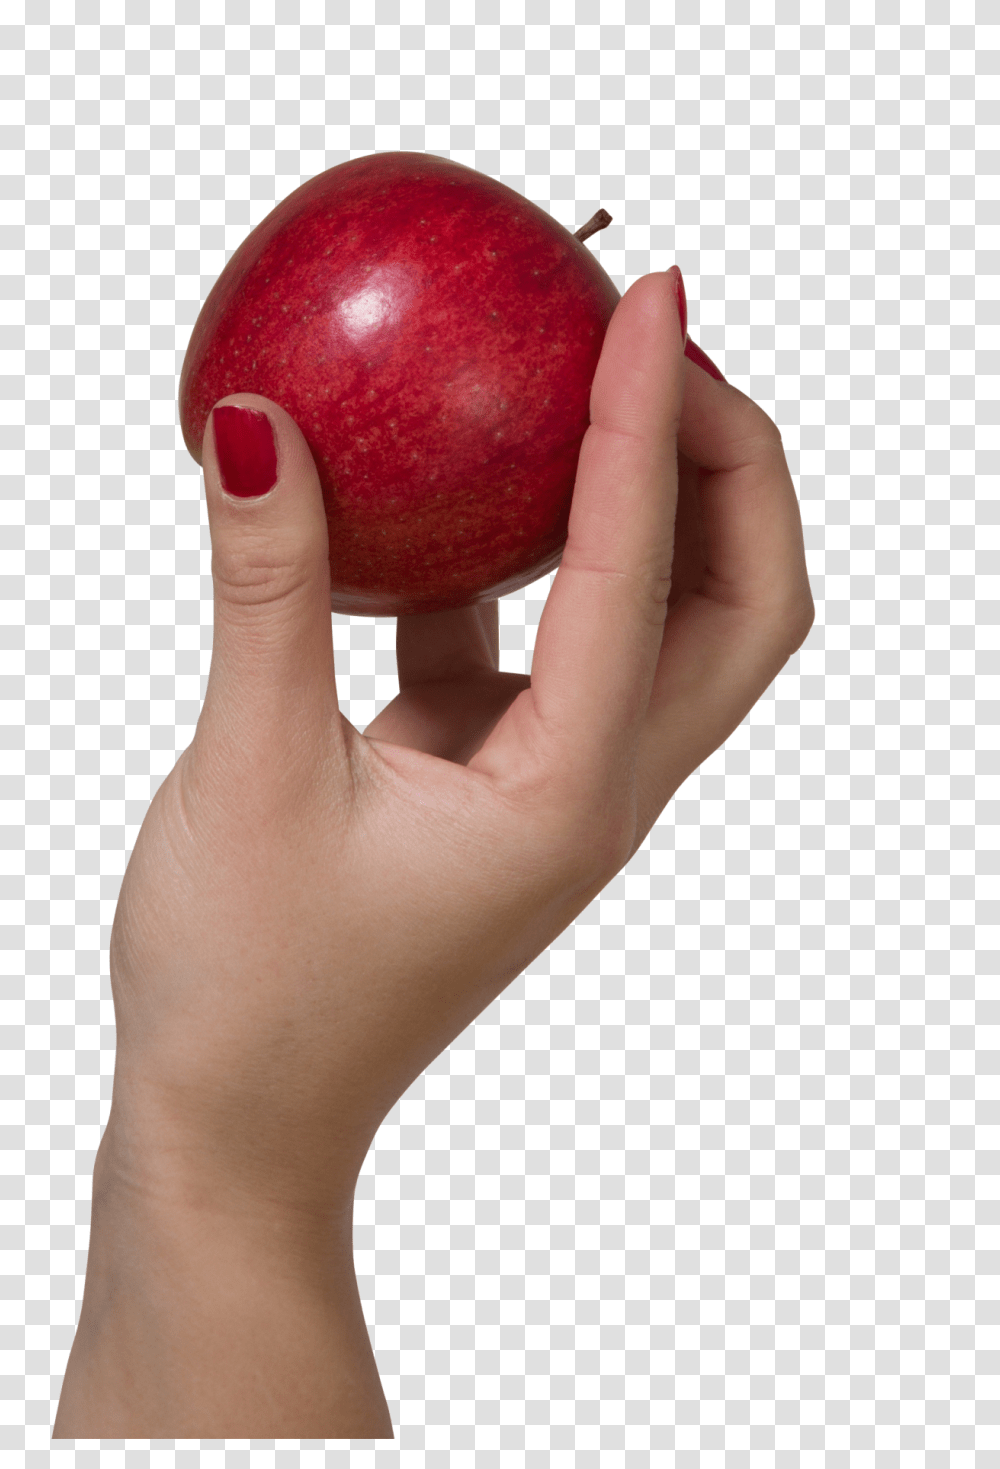 Download Holding An Apple Hand Hold An Apple Hd Apple In Hand, Plant, Person, Human, Fruit Transparent Png